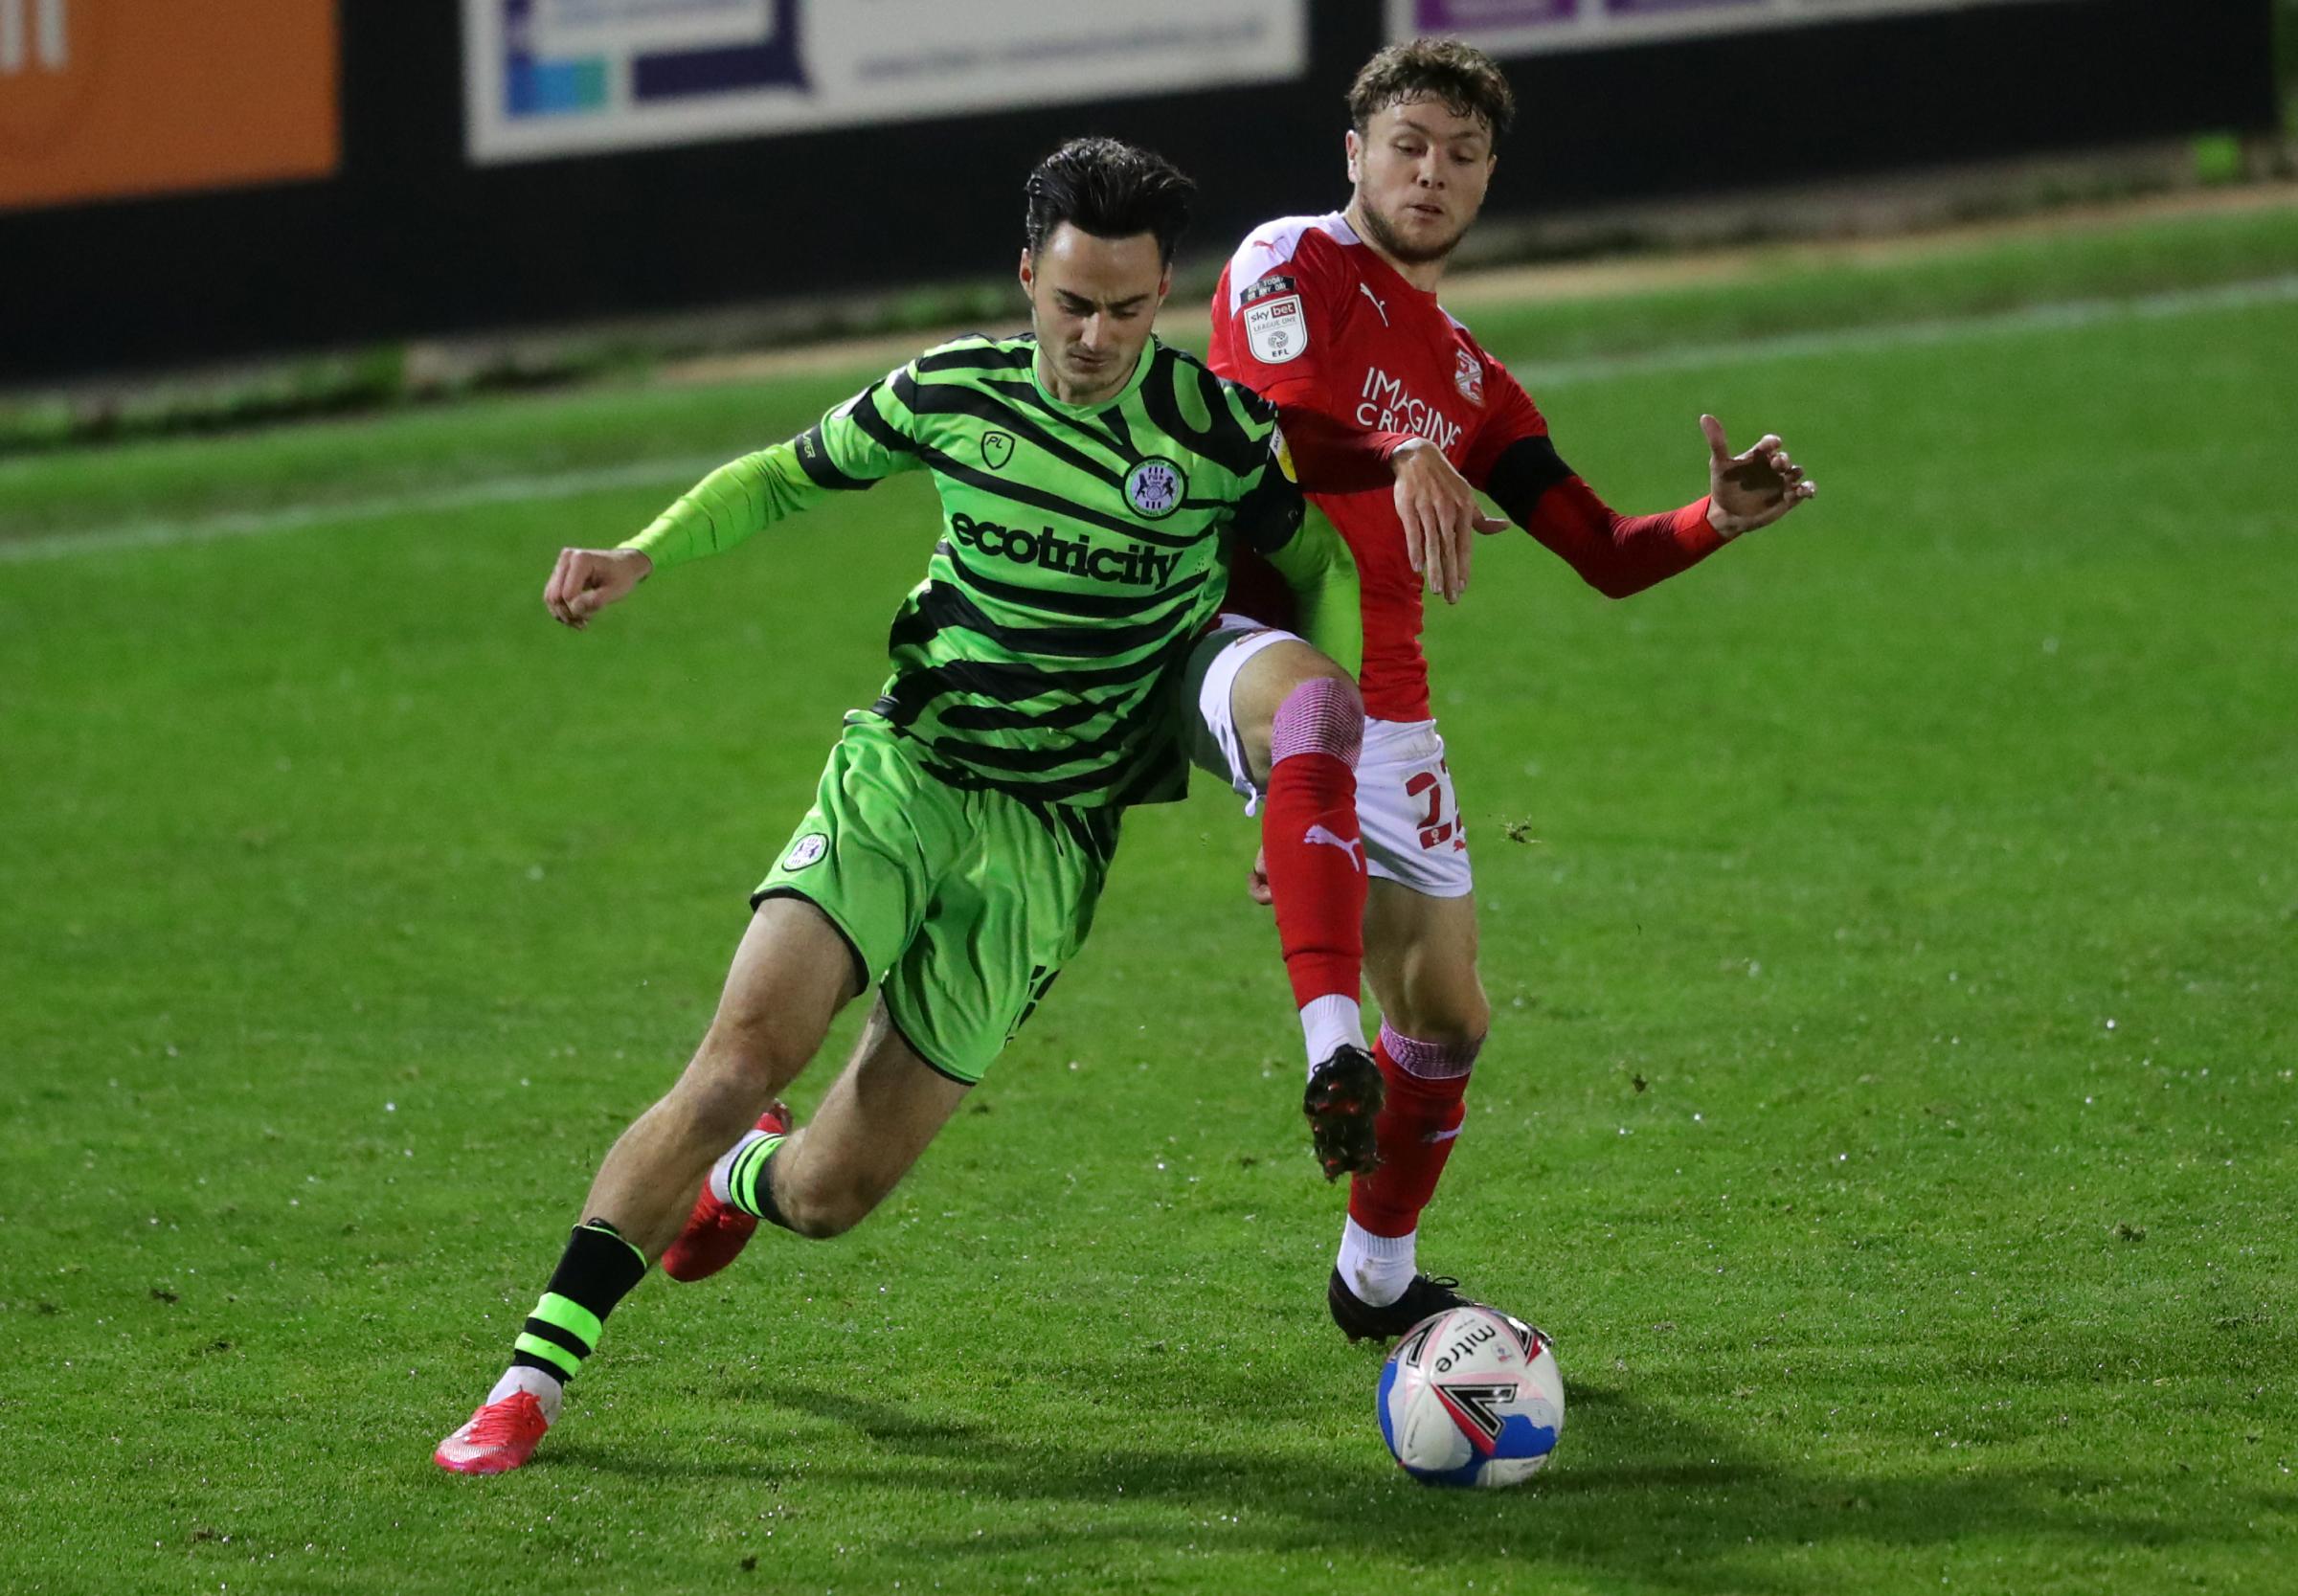 Former County forward Aaron Collins on the run for Forest Green